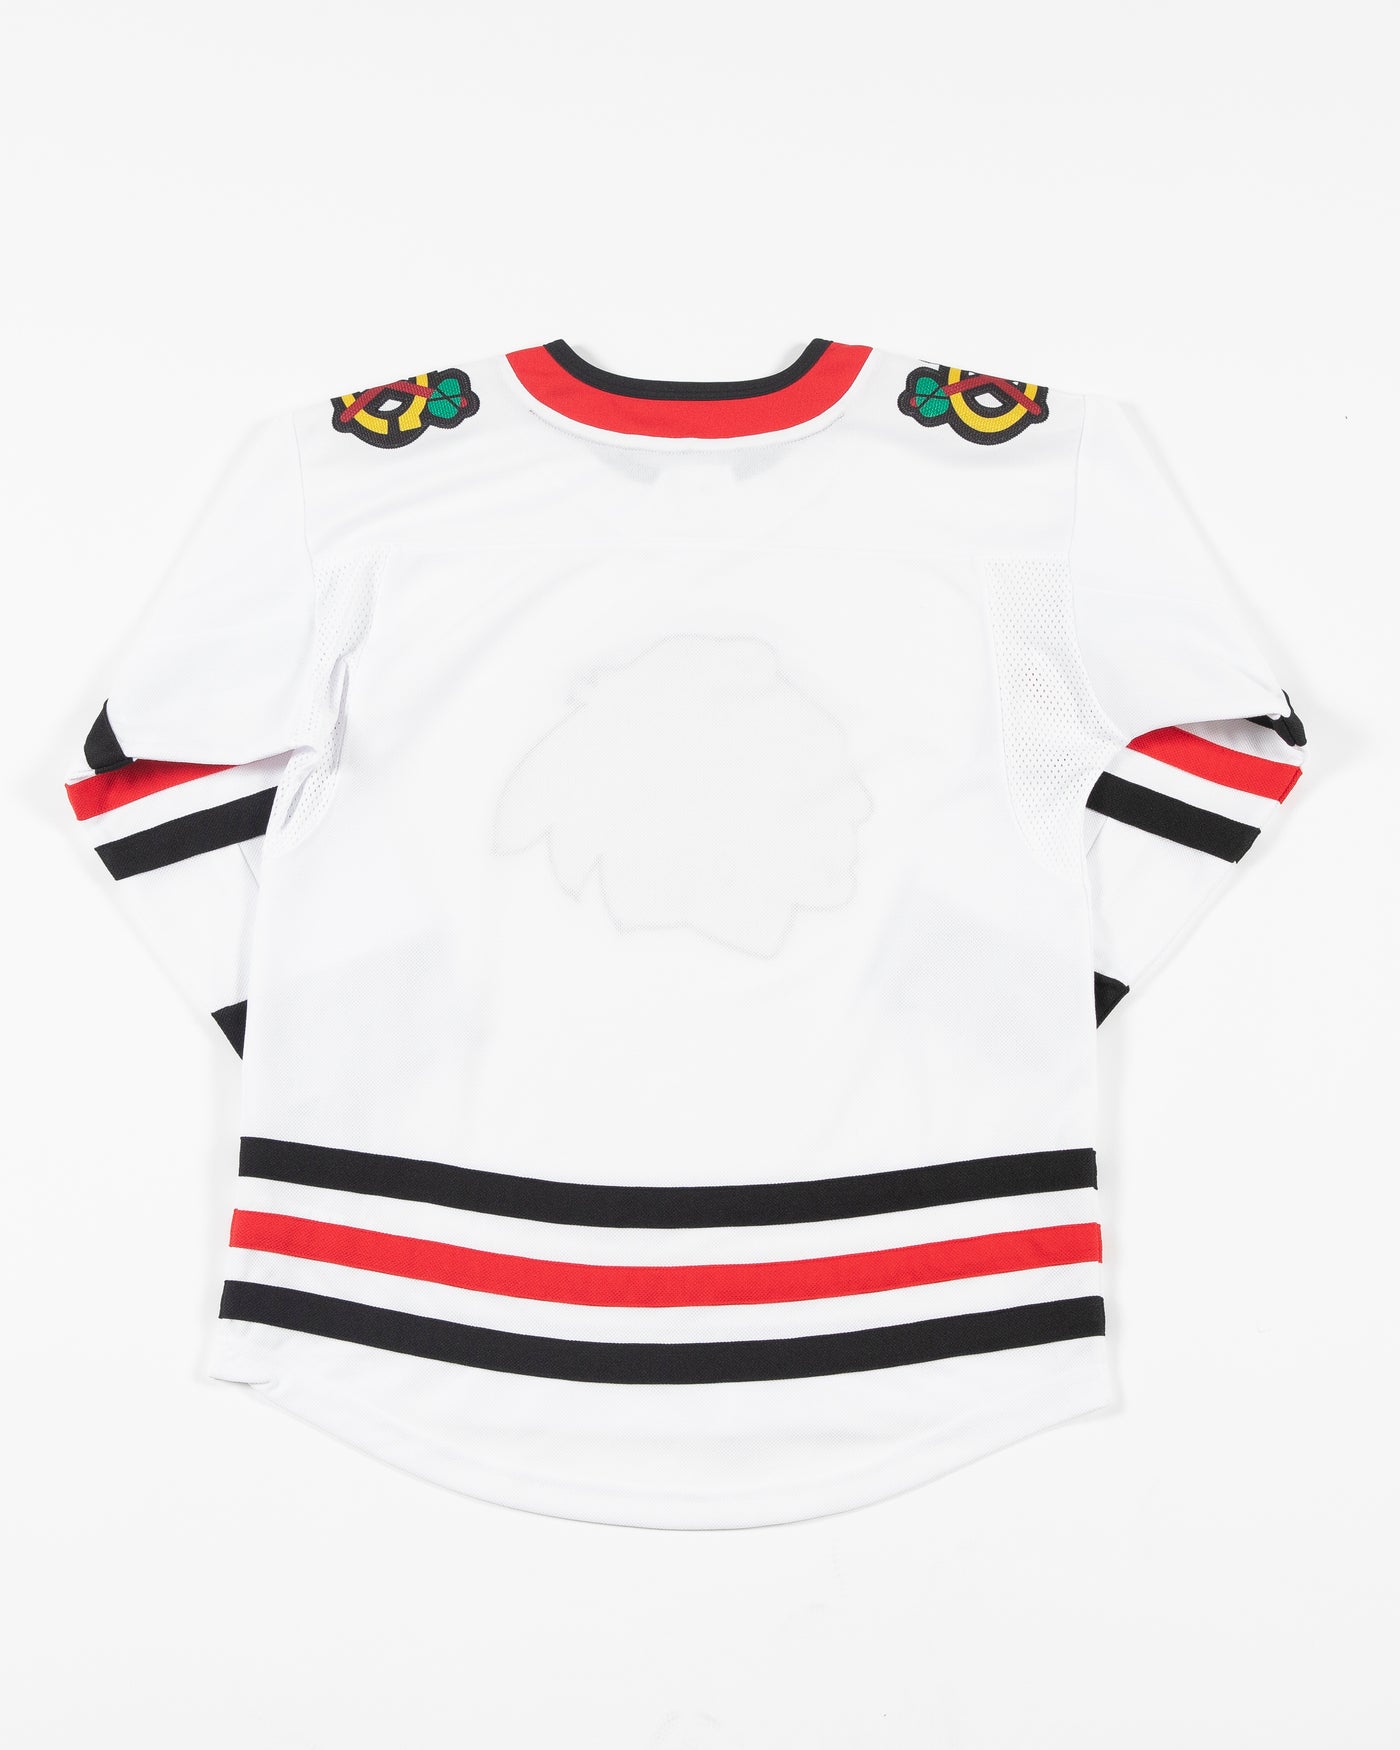 Chicago Blackhawks Blank Red Home Stitched Jersey